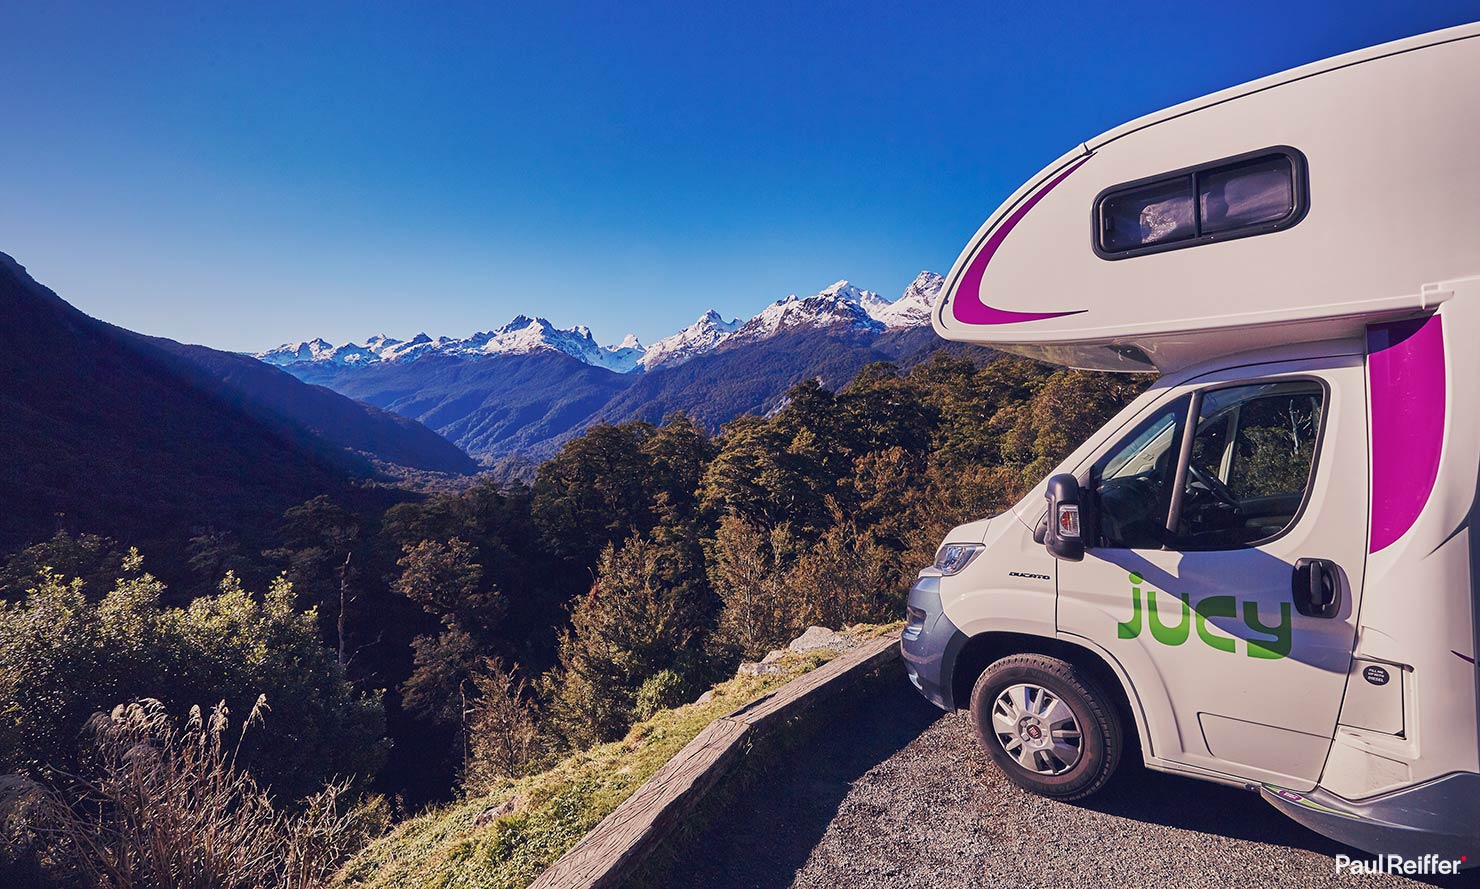 Jucy Camper Van Campervan Mobile Home Milford Road Trip Lookout Point Valley Winter New Zealand Sound Paul Reiffer Photographer